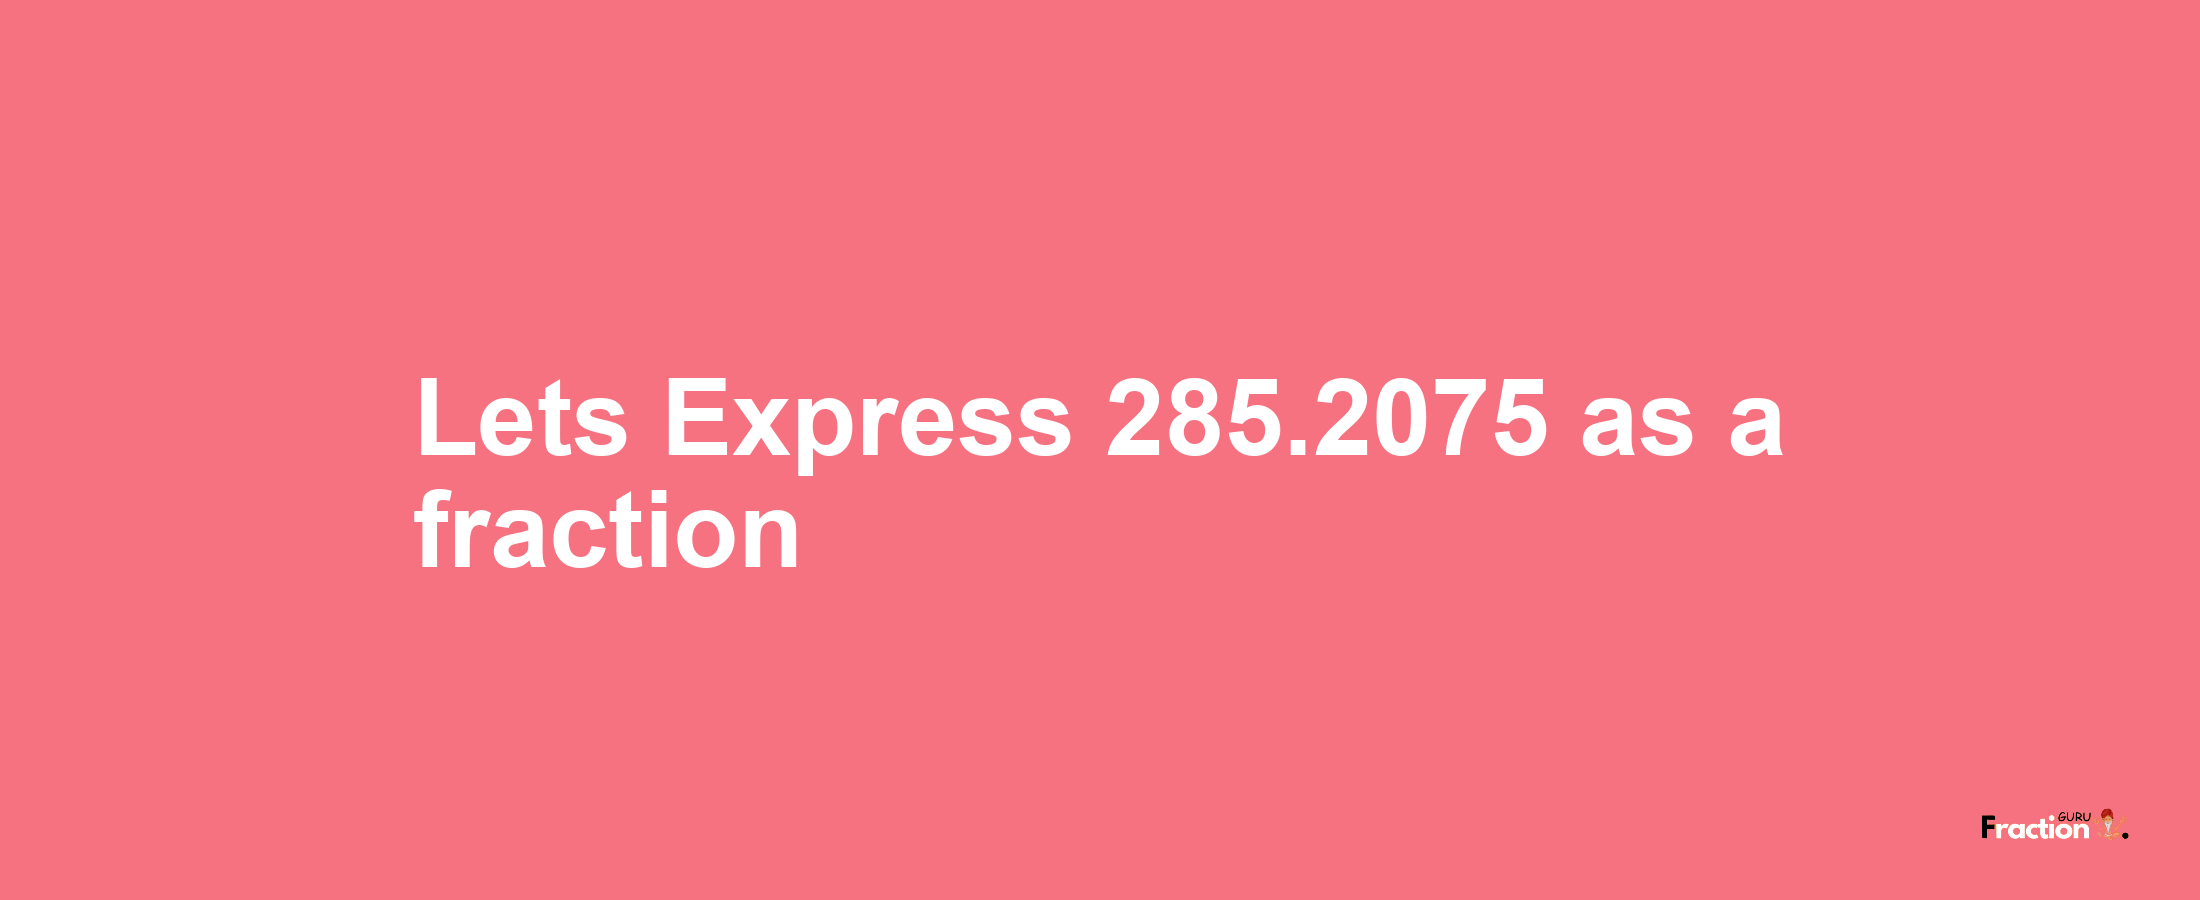 Lets Express 285.2075 as afraction